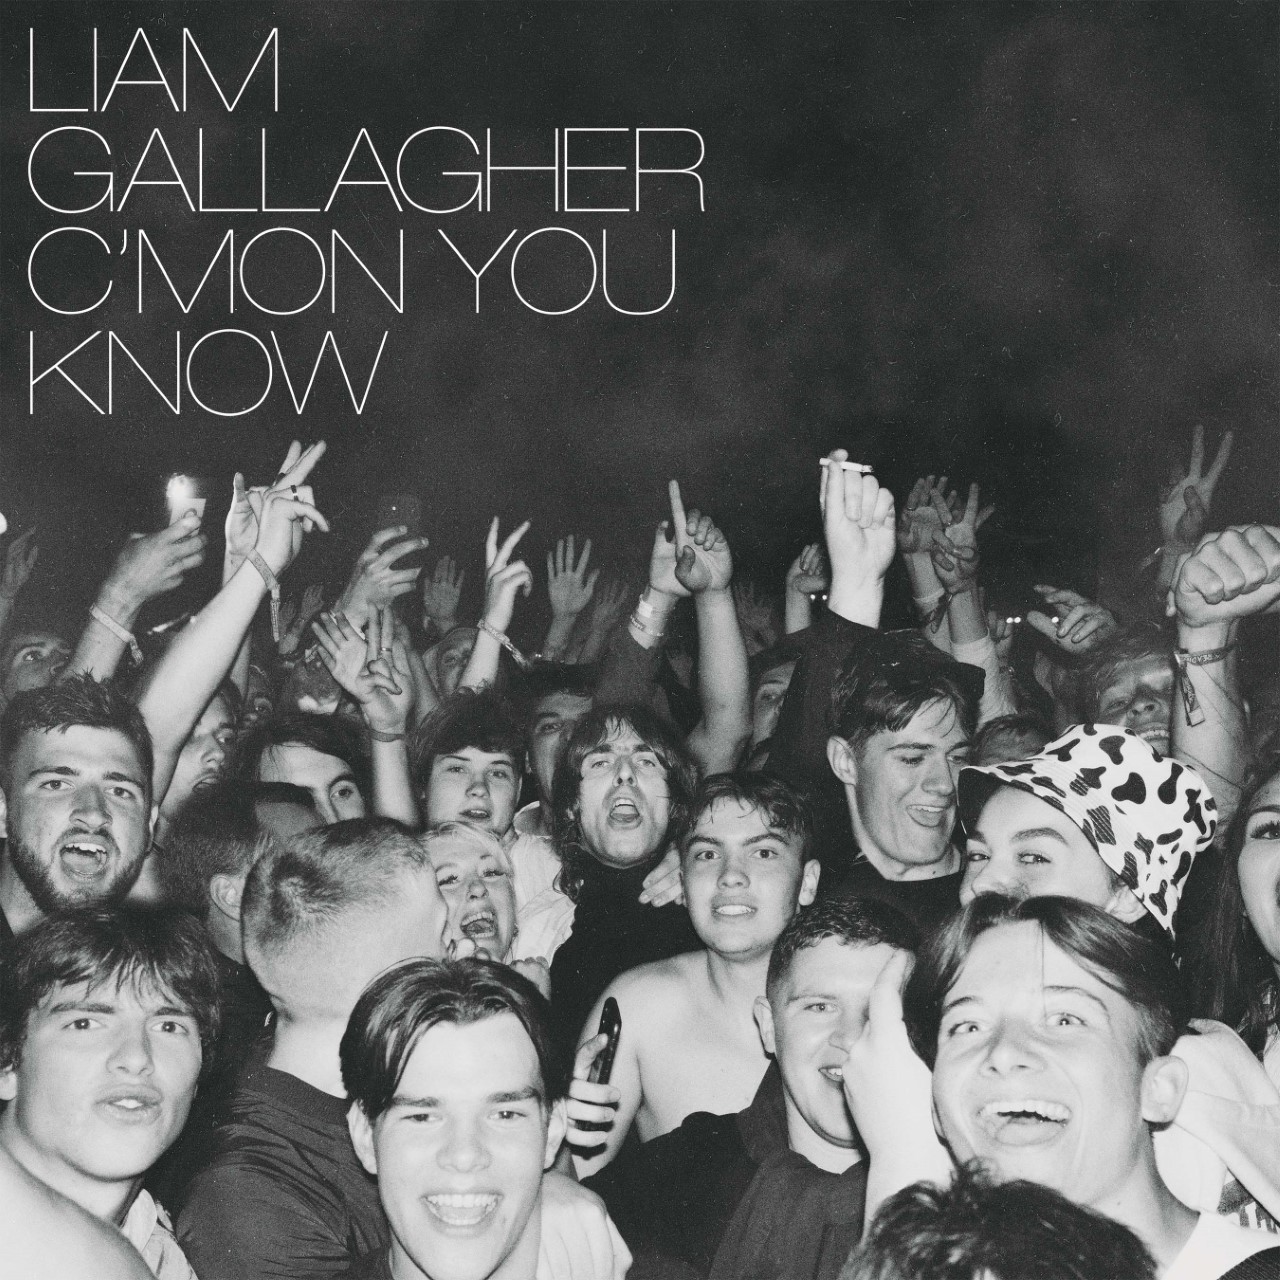 LIAM GALLAGHER THE NEW ALBUM C’MON YOU KNOW OUT NOW